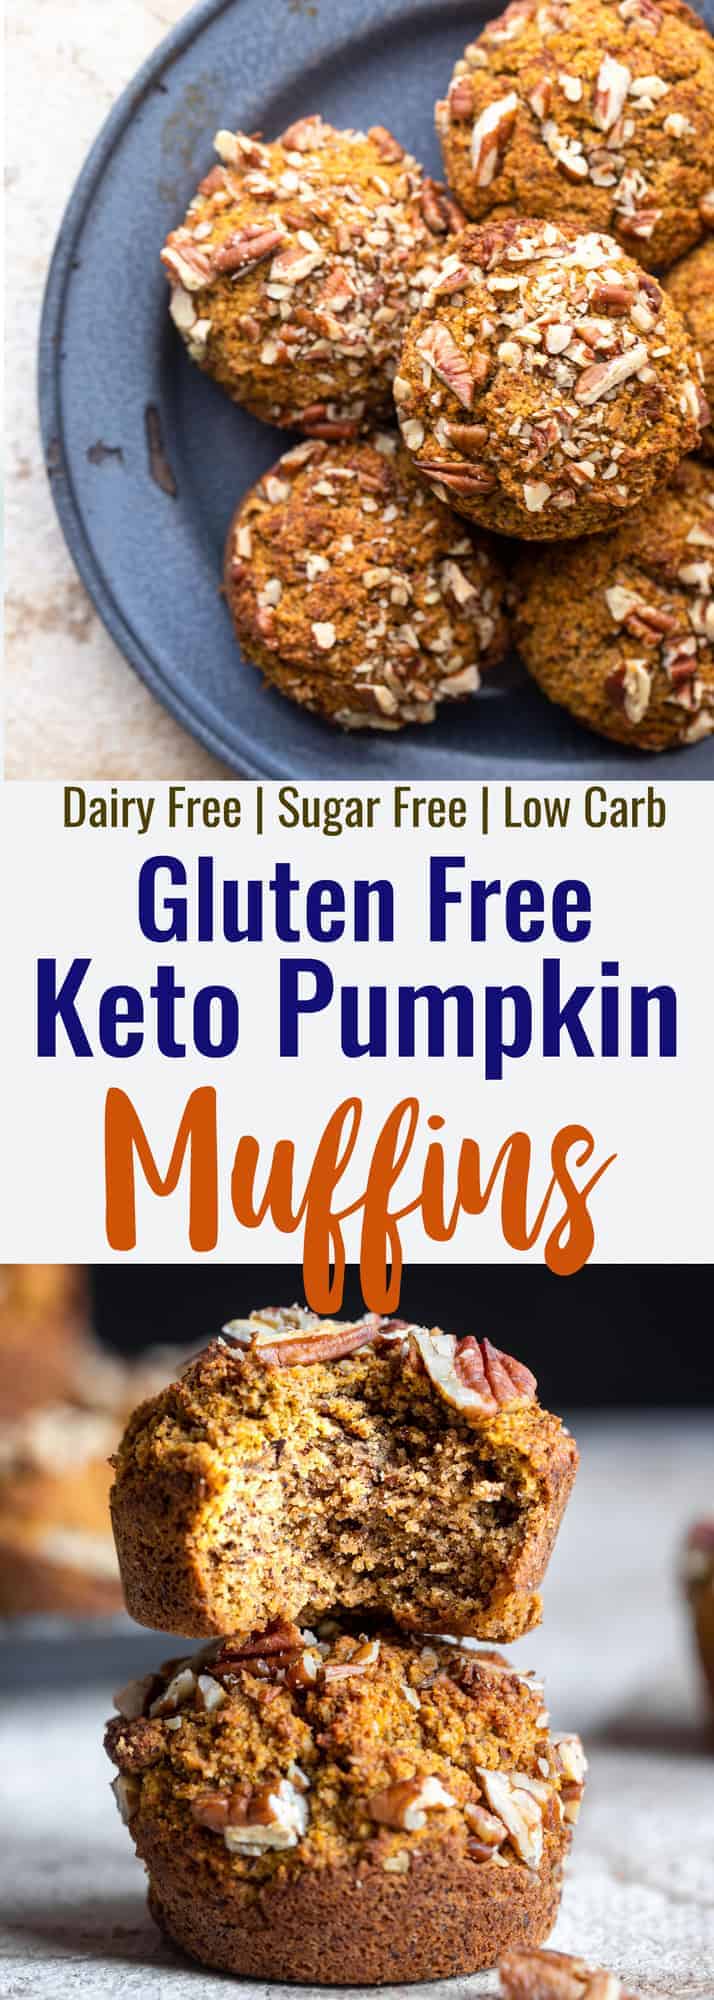 Low Carb Keto Pumpkin Muffins with Almond Flour | Food Faith Fitness